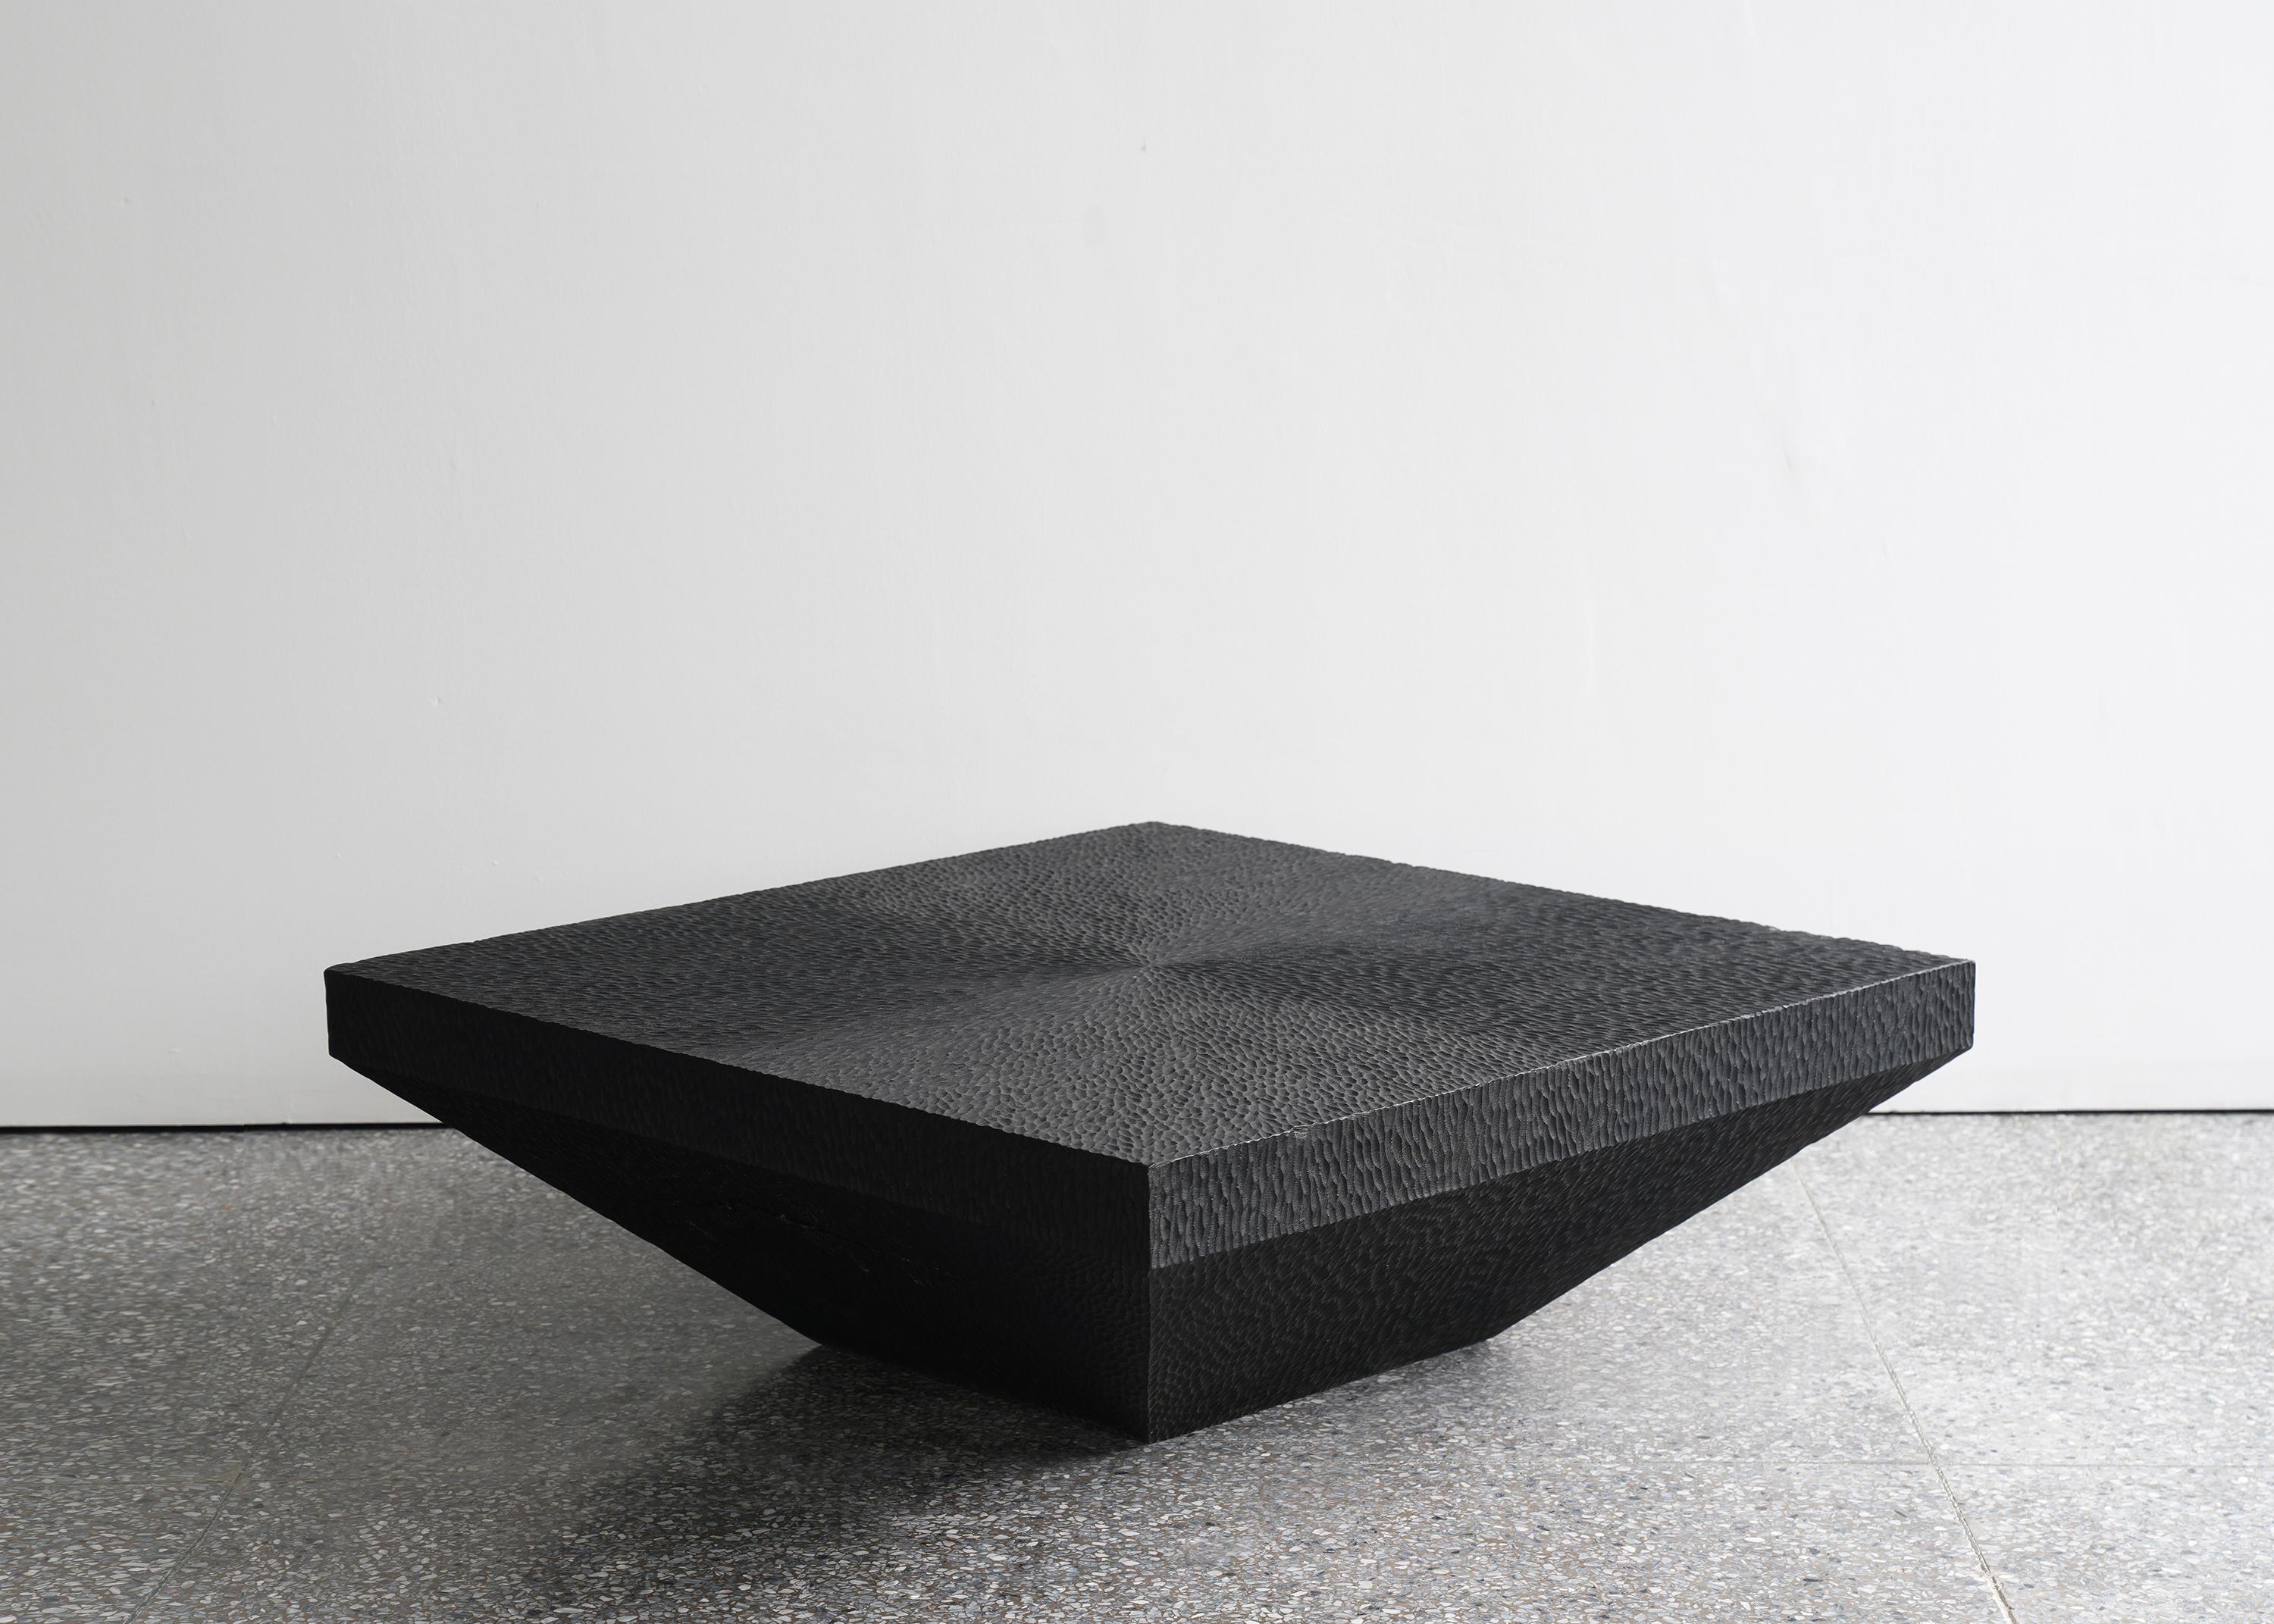 Epang 04 coffee table by Sing Chan
Dimensions: W 80 x D 80 x H 25 cm
Materials: Manual sculpture, teak, black paint, waxing.

Sing Chan ( Chinese: 陈星宇/Xingyu Chen) , the founder of SINGCHAN DESIGN, was born in 1990, and graduated from the Department